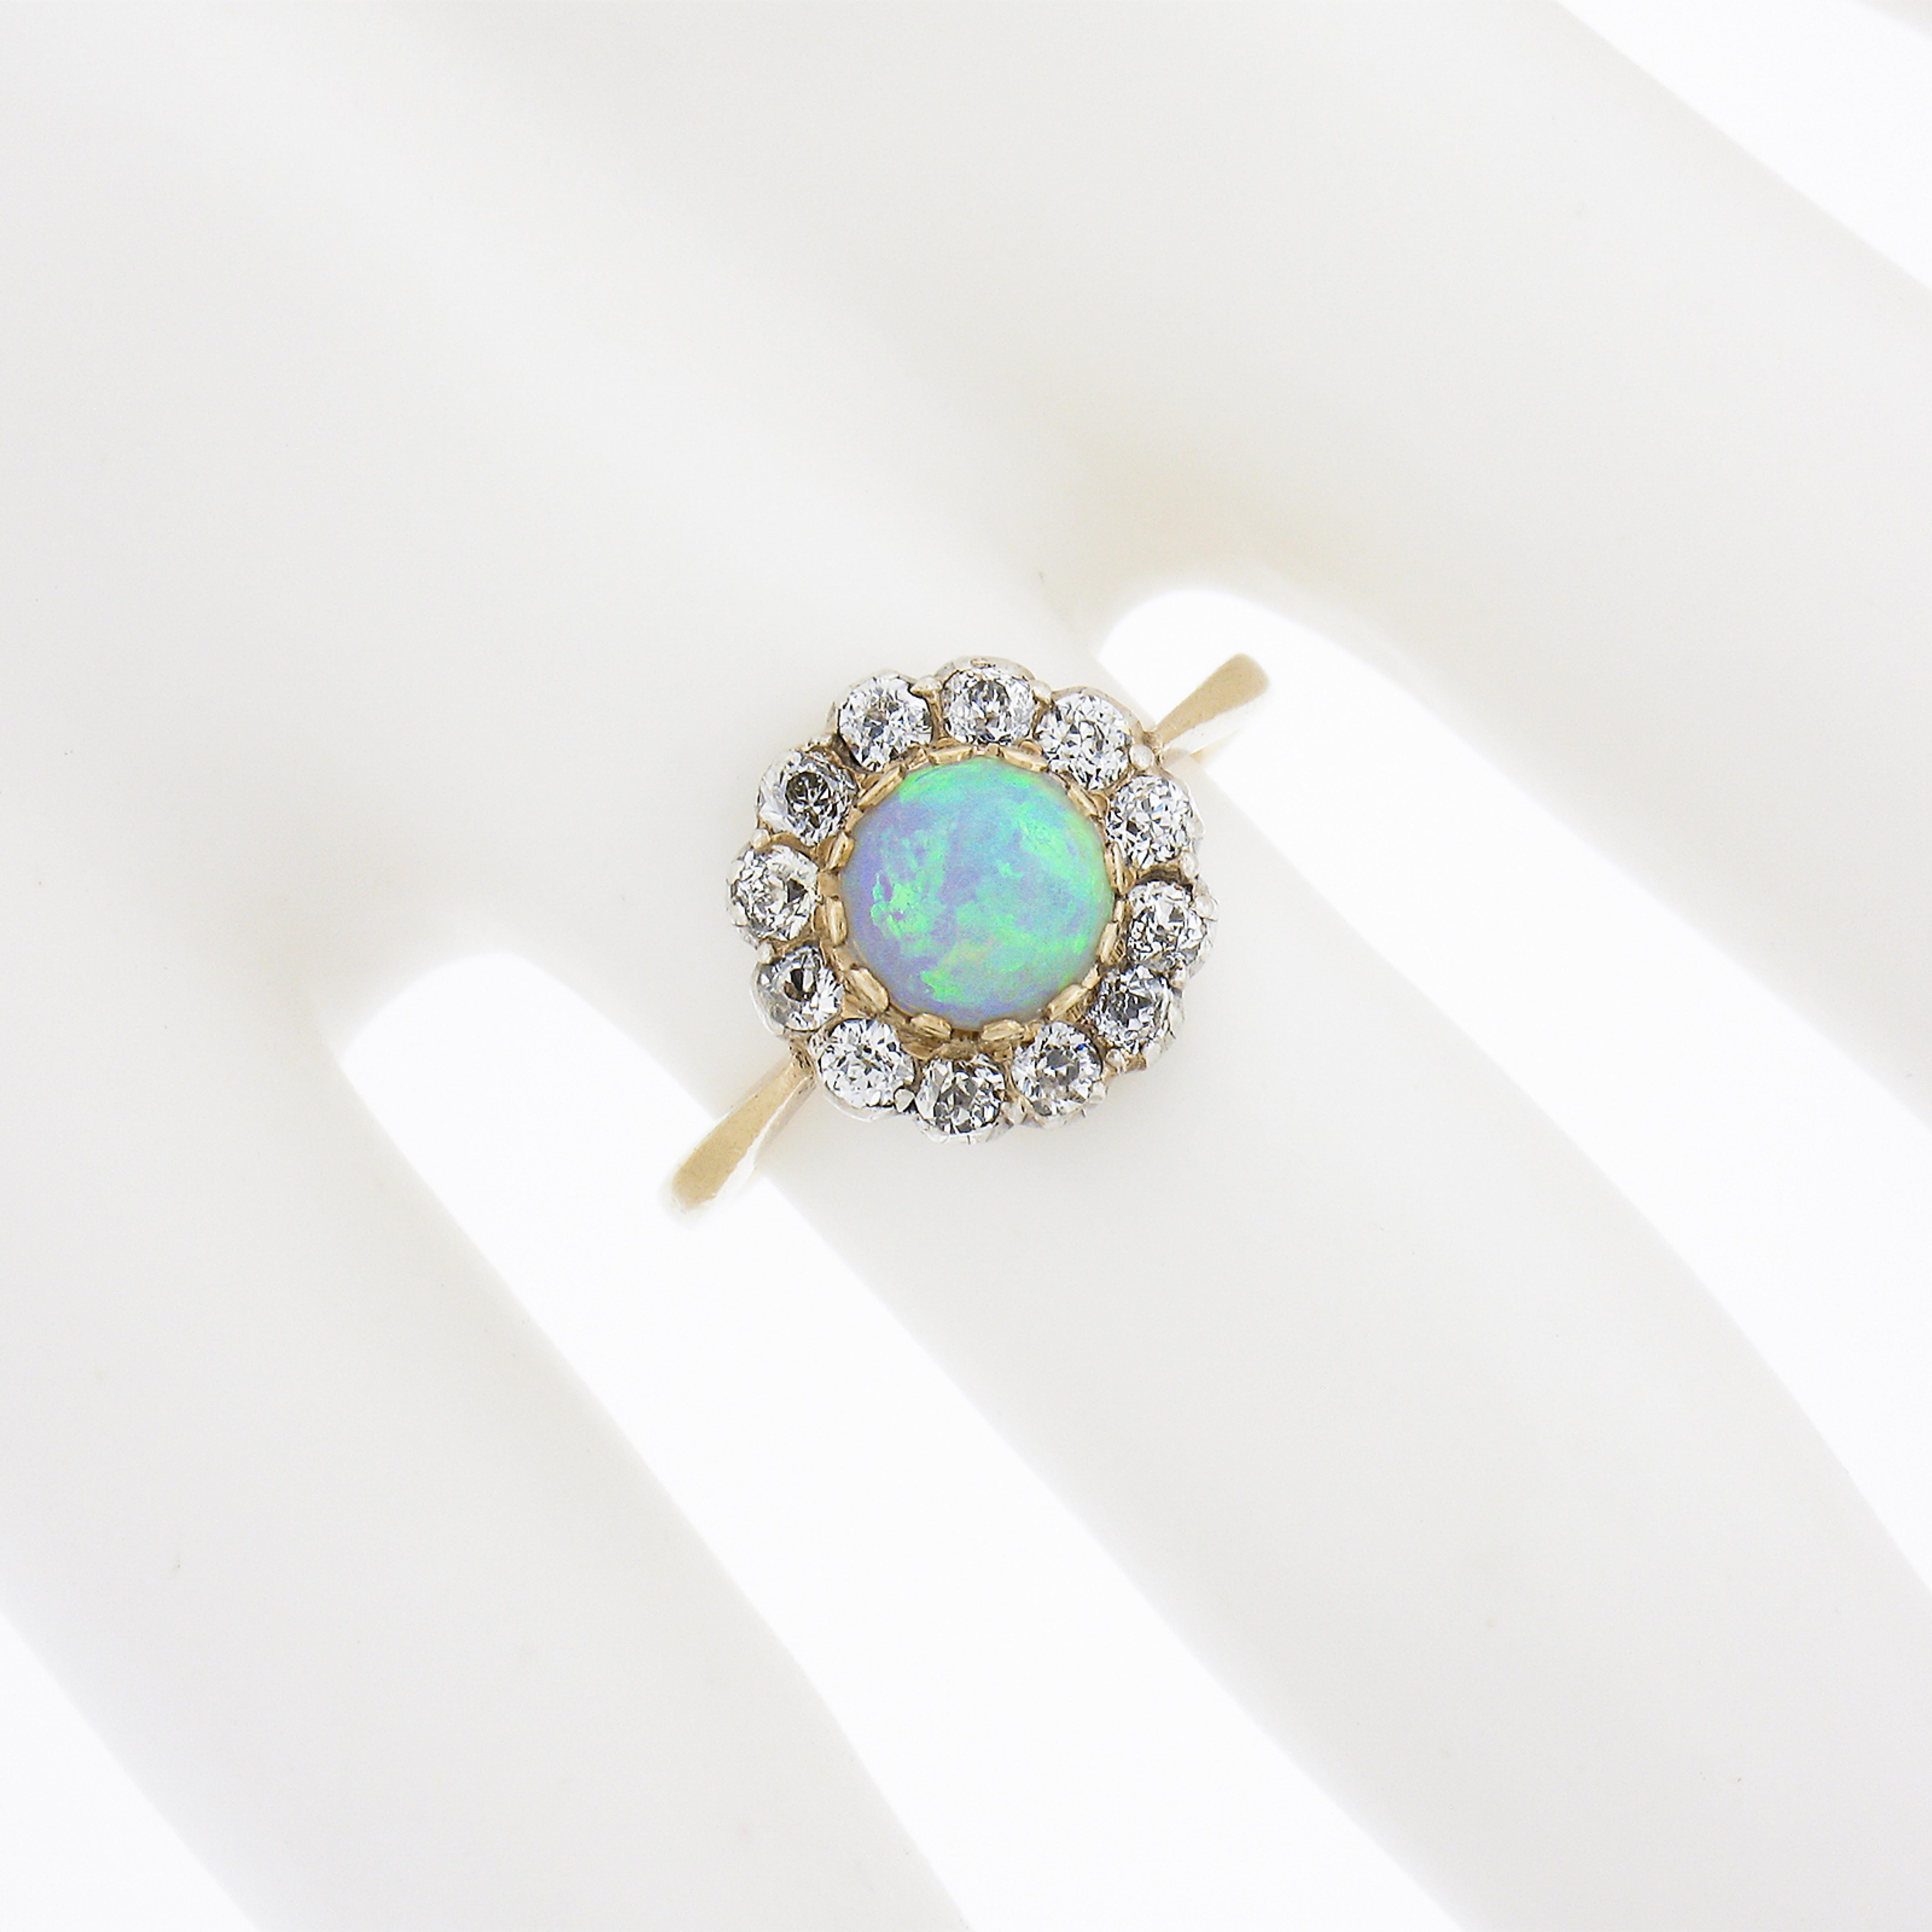 Antique Victorian 9K Gold Round Opal Solitaire w/ Old Cut Diamond Halo Ring In Excellent Condition For Sale In Montclair, NJ